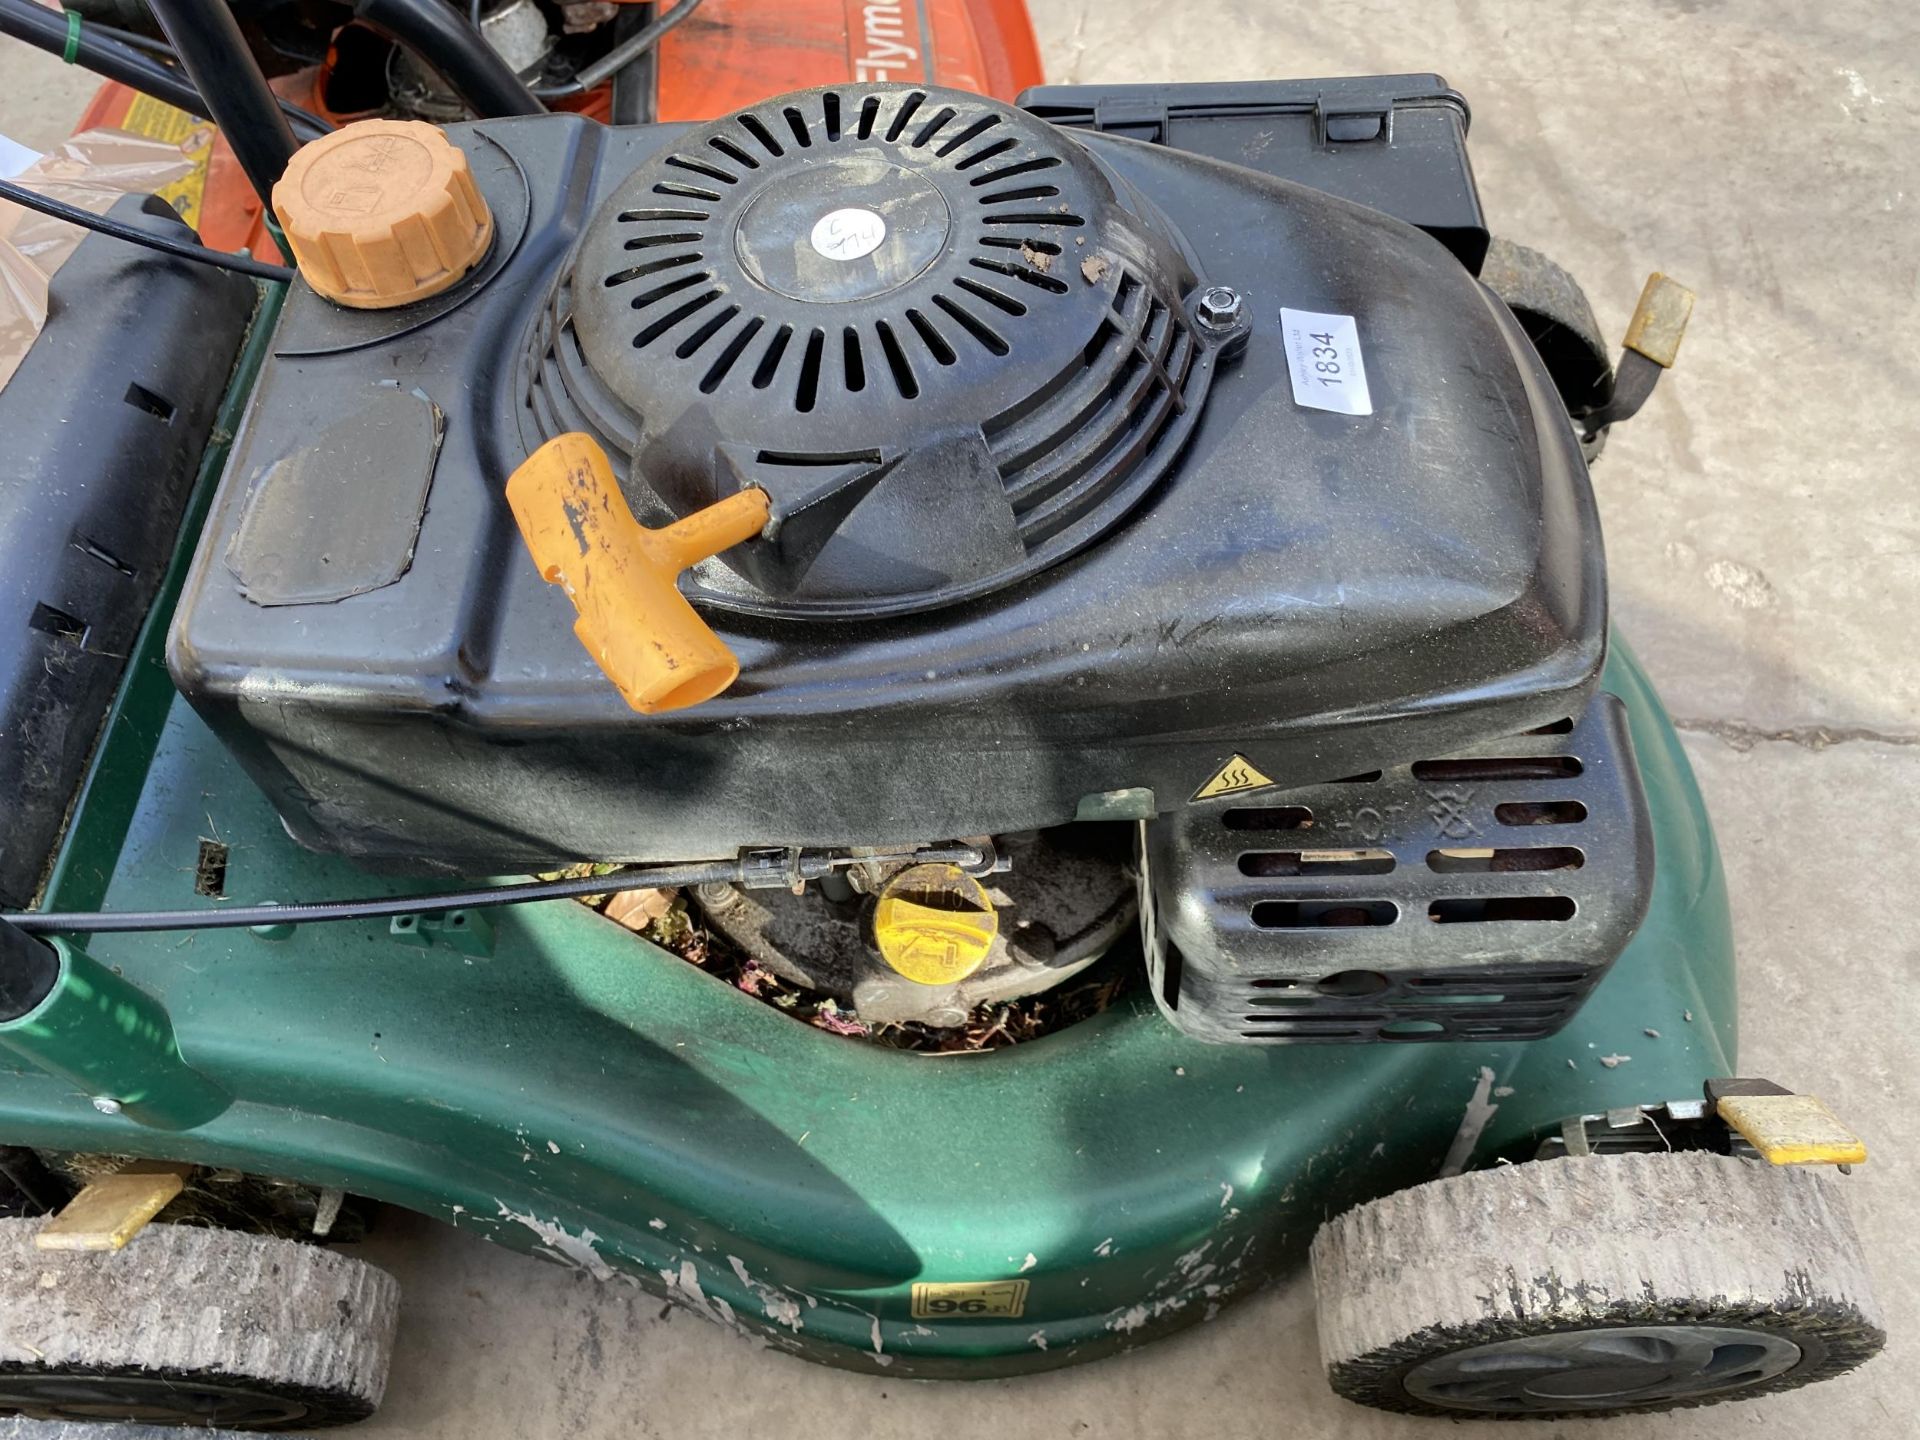 A PETROL ENGINE LAWN MOWER WITH GRASS BOX - Image 3 of 3